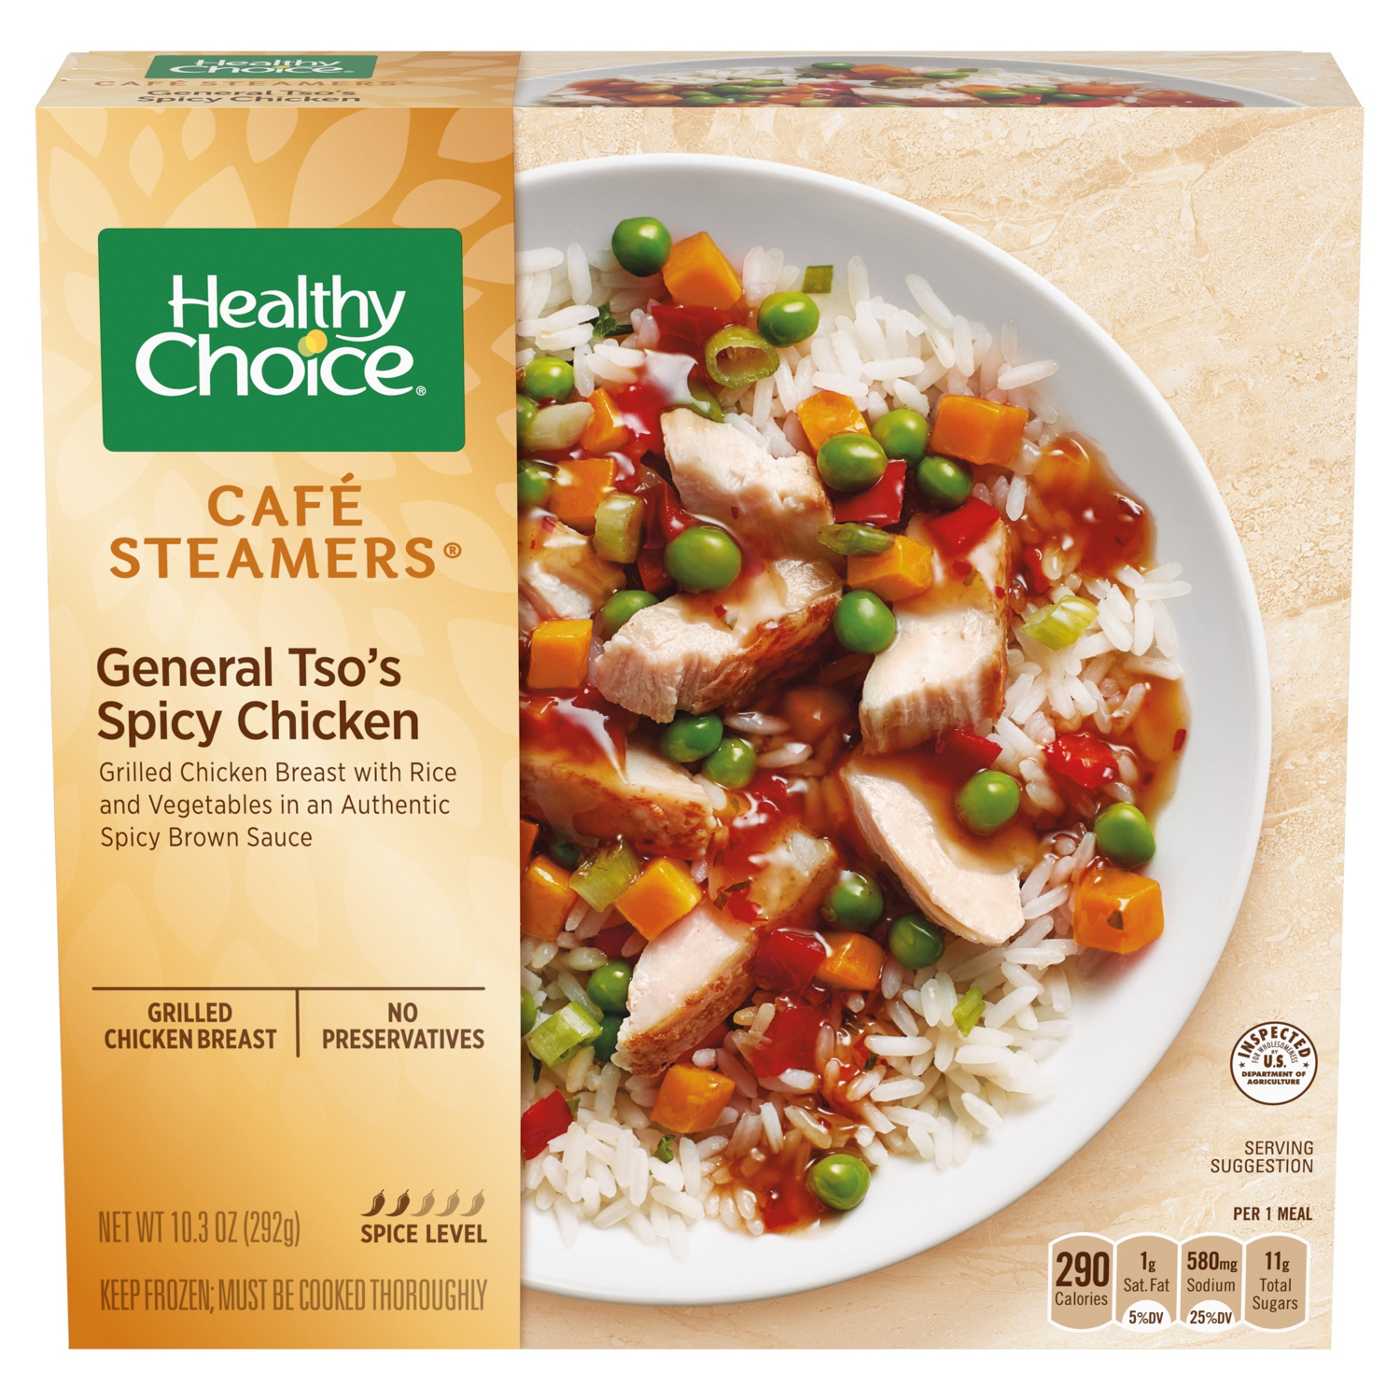 Healthy Choice Café Steamers General Tso's Spicy Chicken Frozen Meal; image 1 of 7